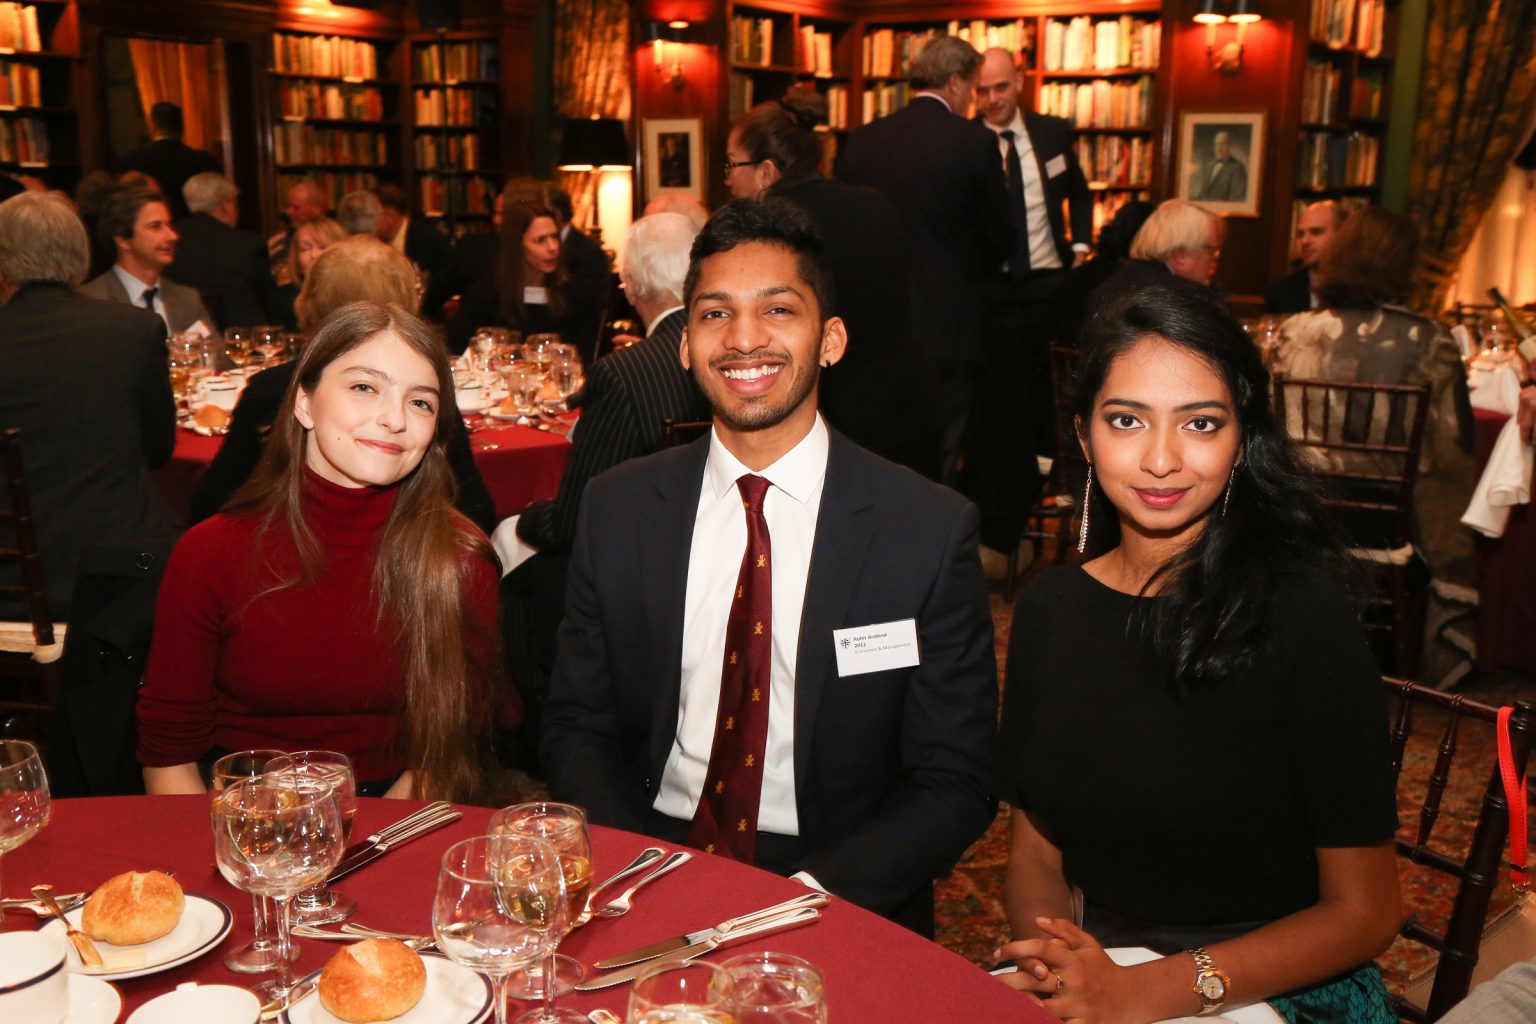 Alumni at the annual New York Dinner